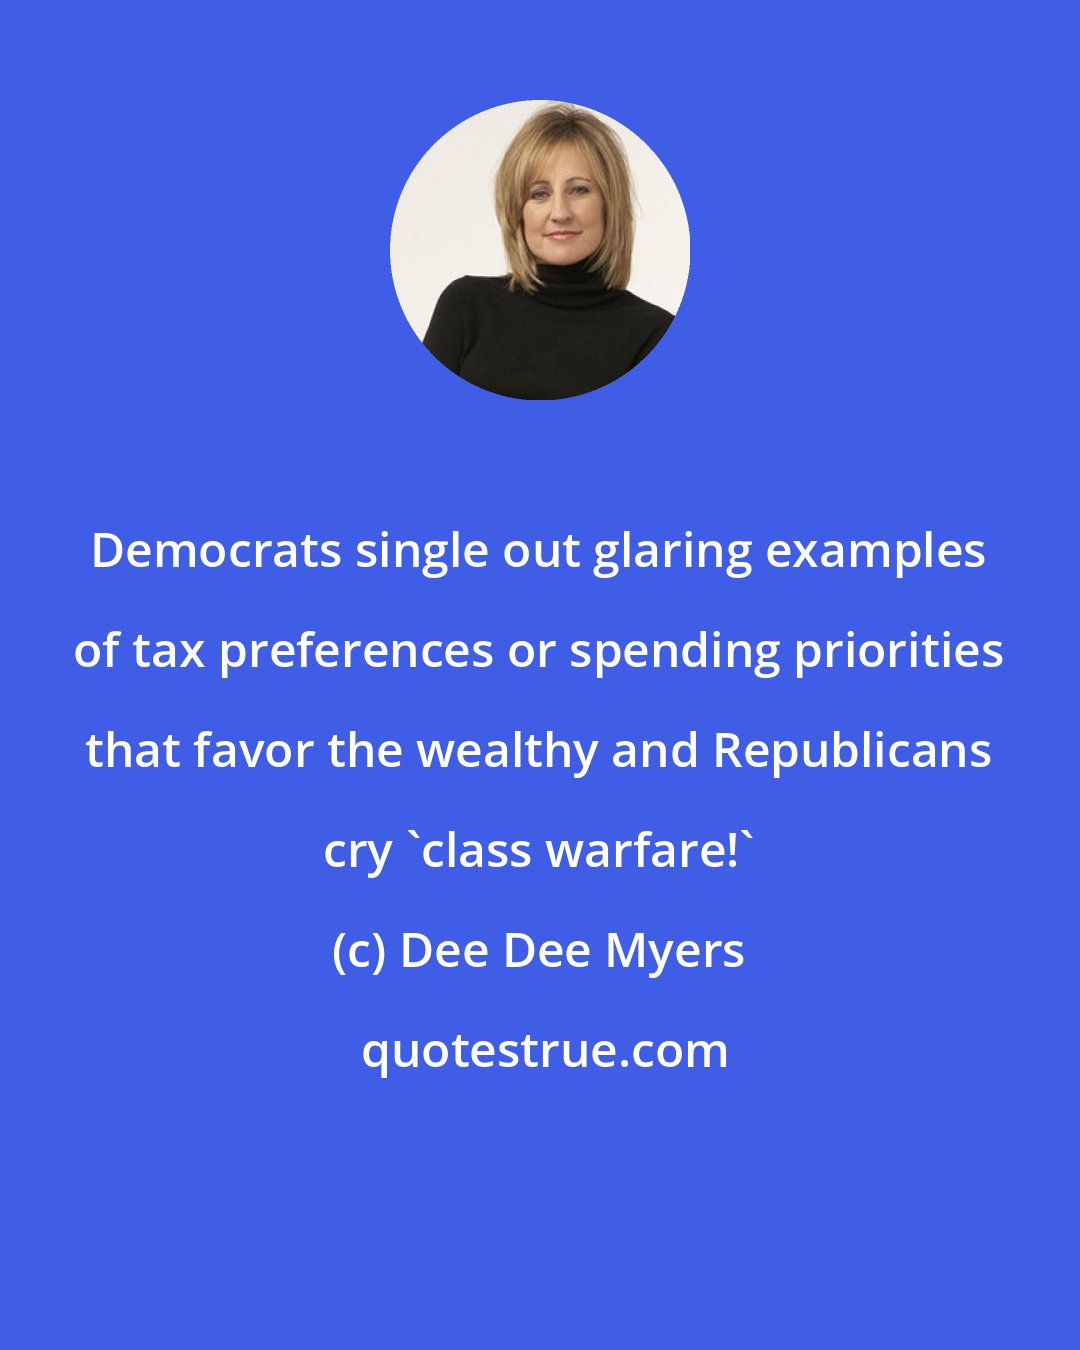 Dee Dee Myers: Democrats single out glaring examples of tax preferences or spending priorities that favor the wealthy and Republicans cry 'class warfare!'